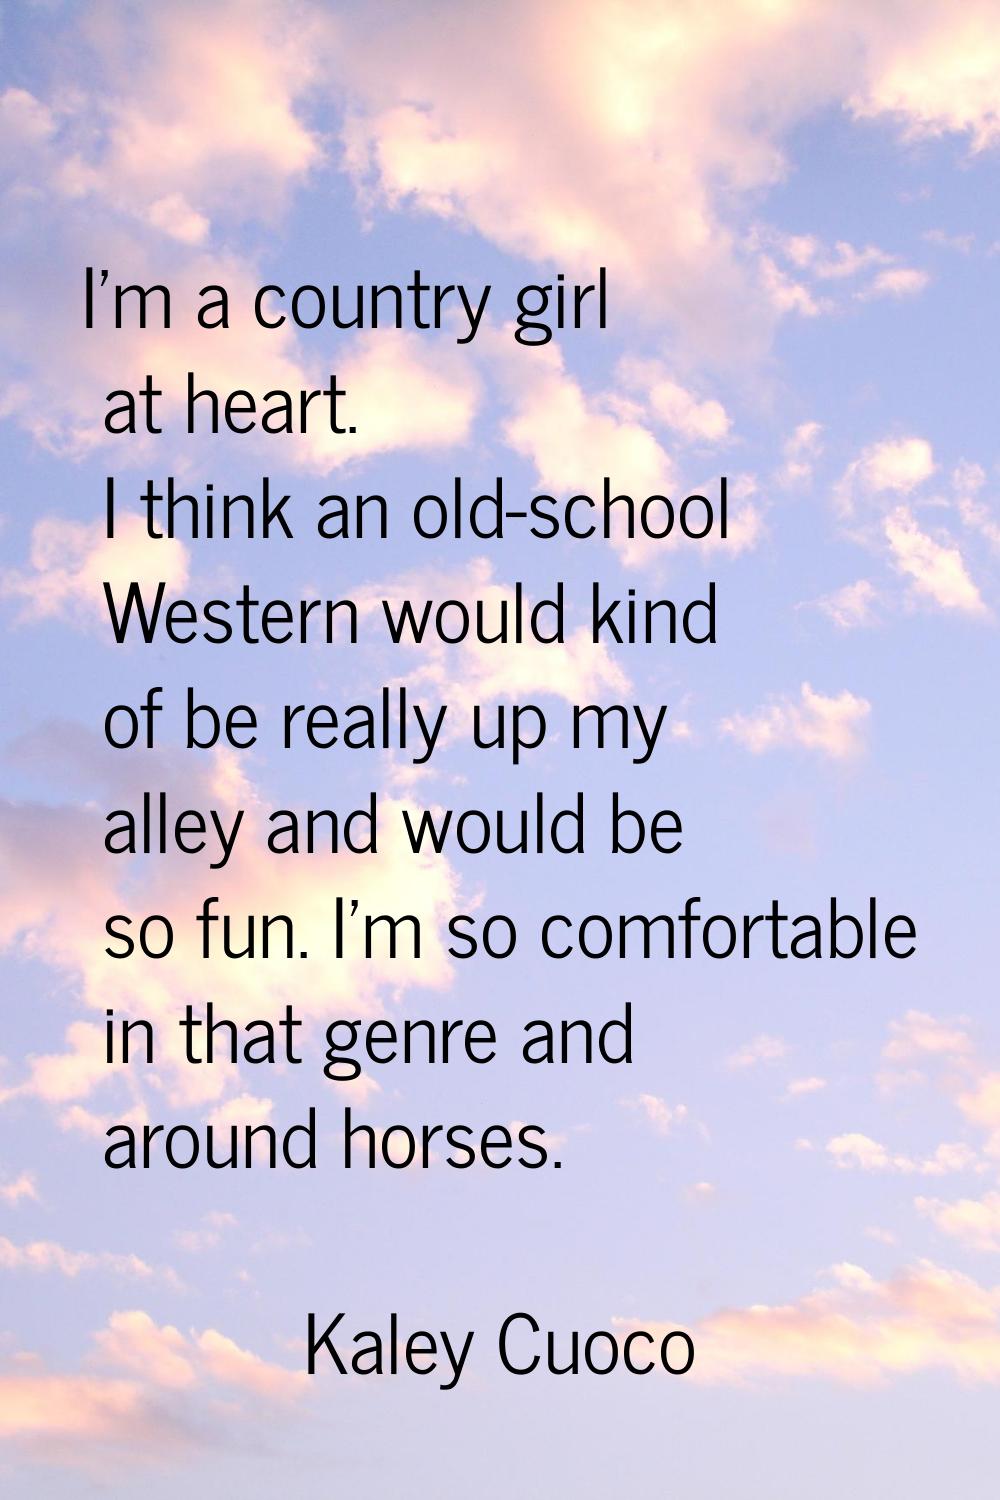 I'm a country girl at heart. I think an old-school Western would kind of be really up my alley and 